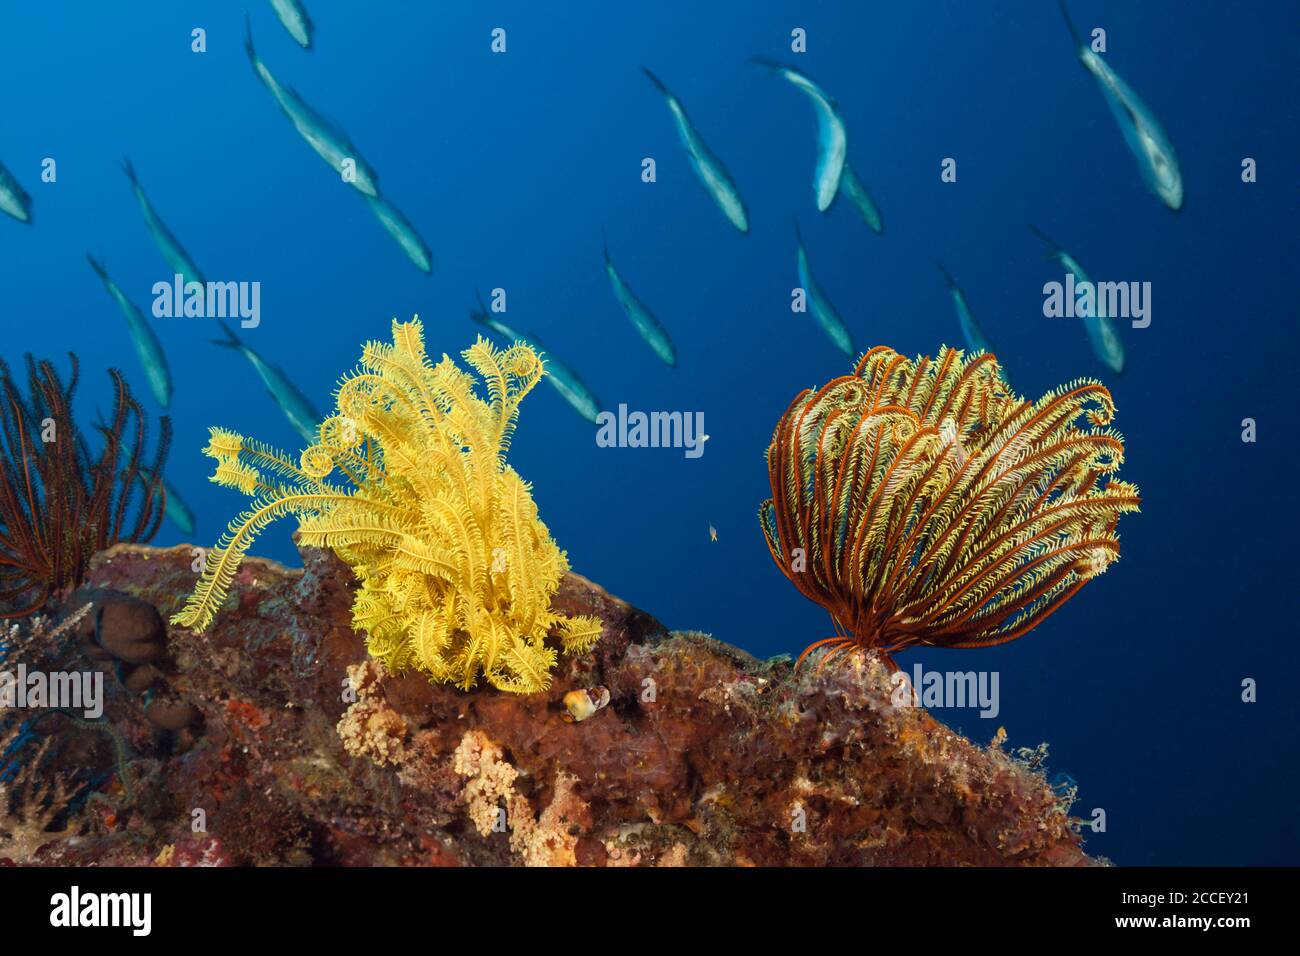 Soft Corals in Coral Reef, Dendronephthya, Kimbe Bay, New Britain, Papua New Guinea Stock Photo